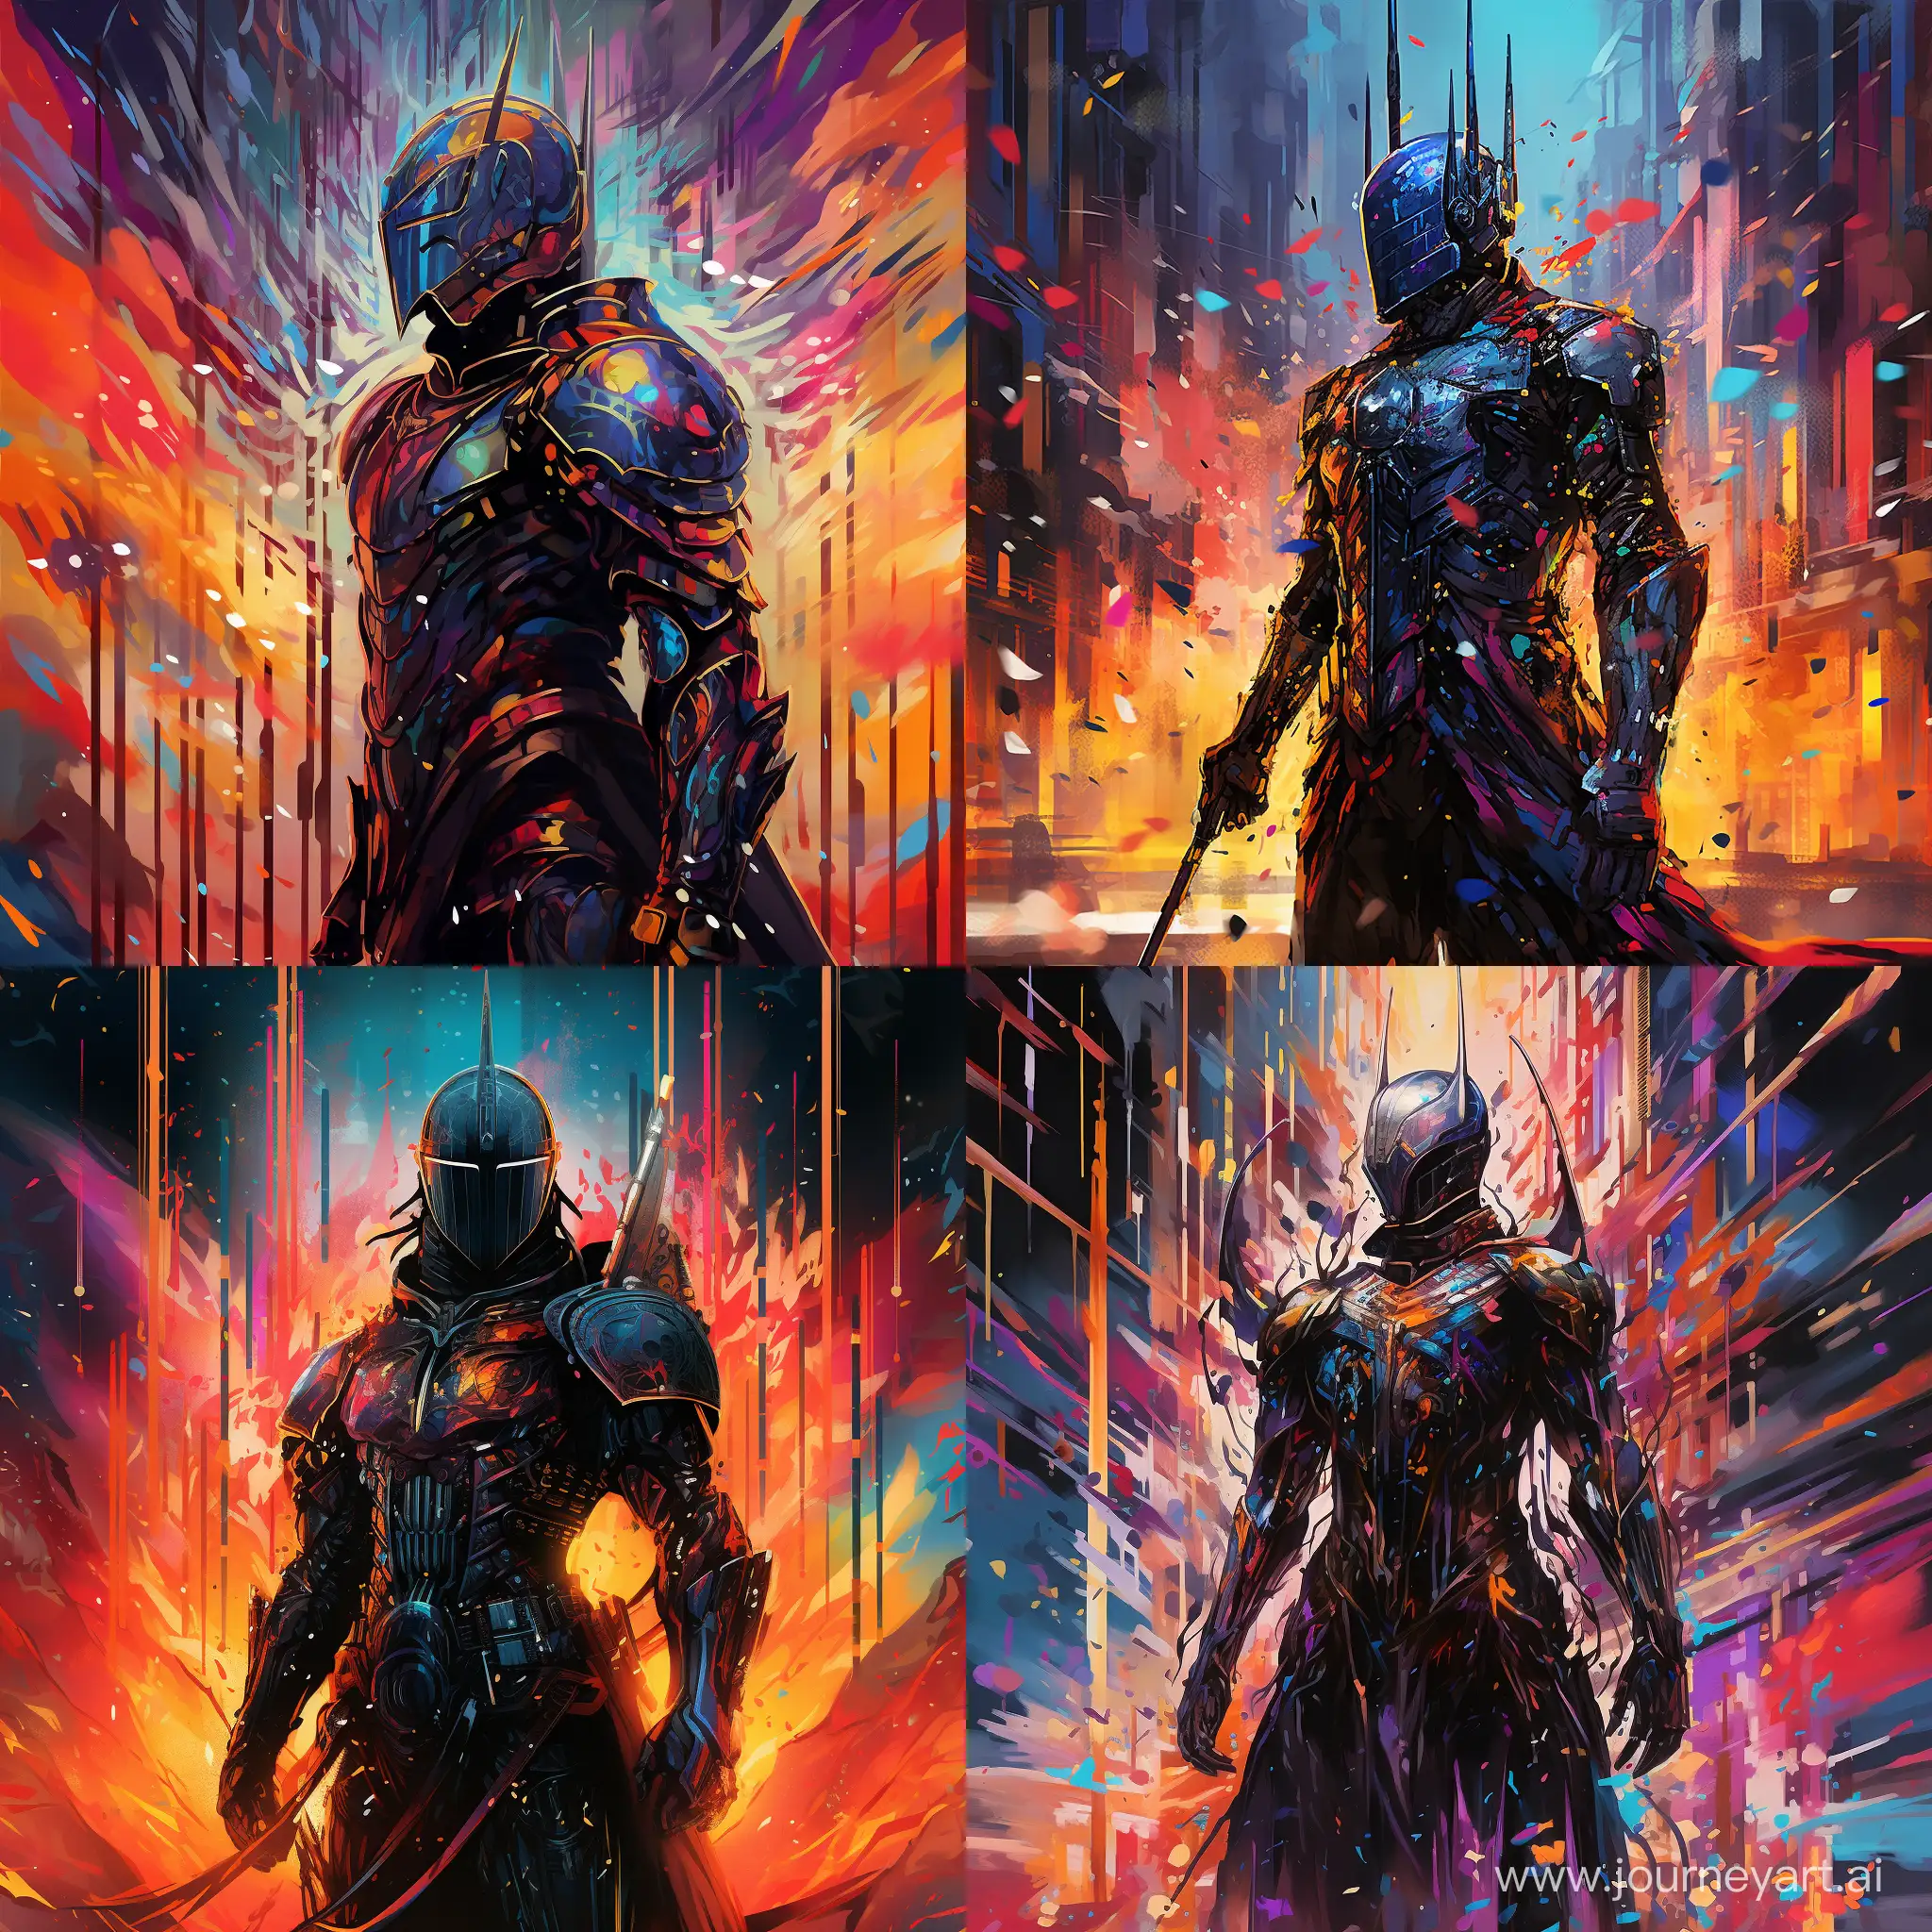 stands tall, The Black knight stands tall, in cyberpunk style, stands tall, explosion of color, abstraction, fantasy  